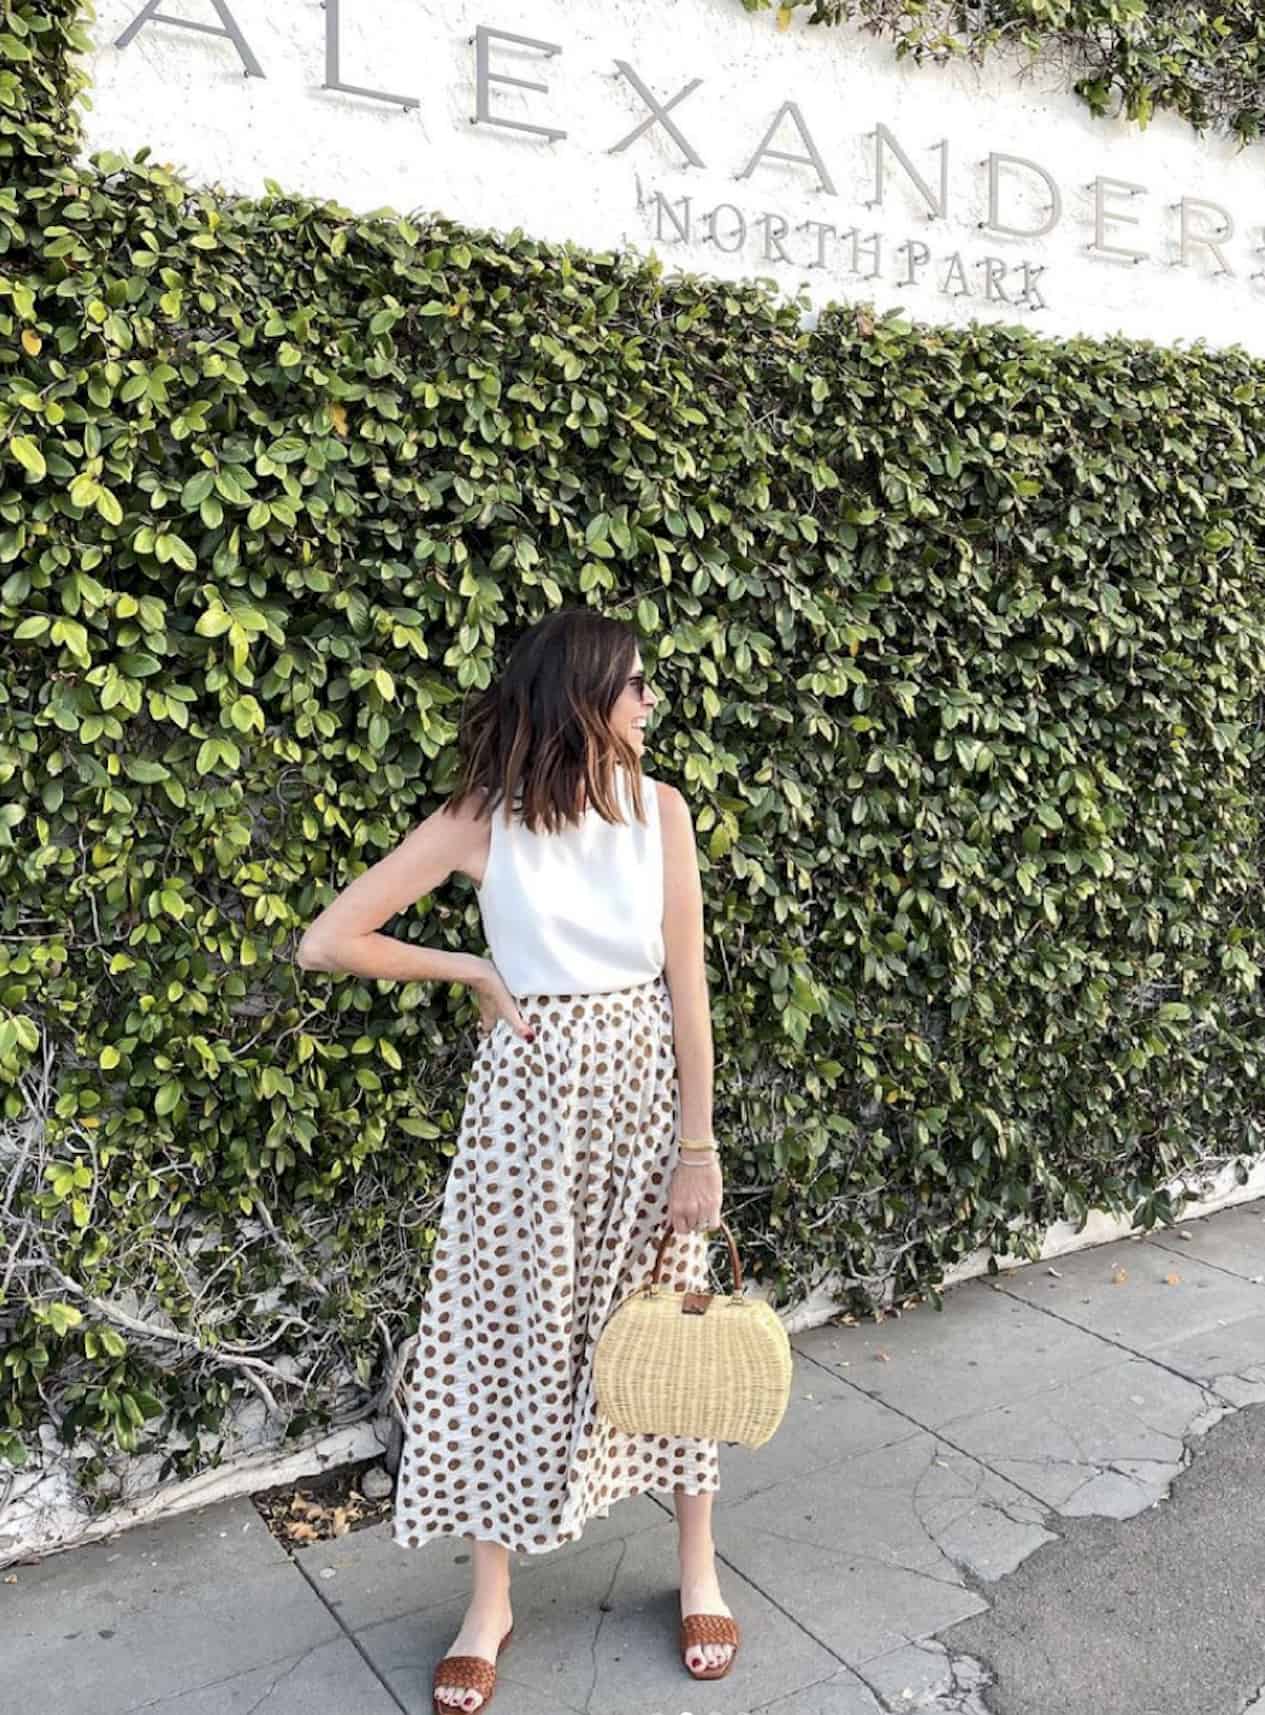 image of a woman standing in front of a wall with vines wearing a polka dot midi skirt and white blouse